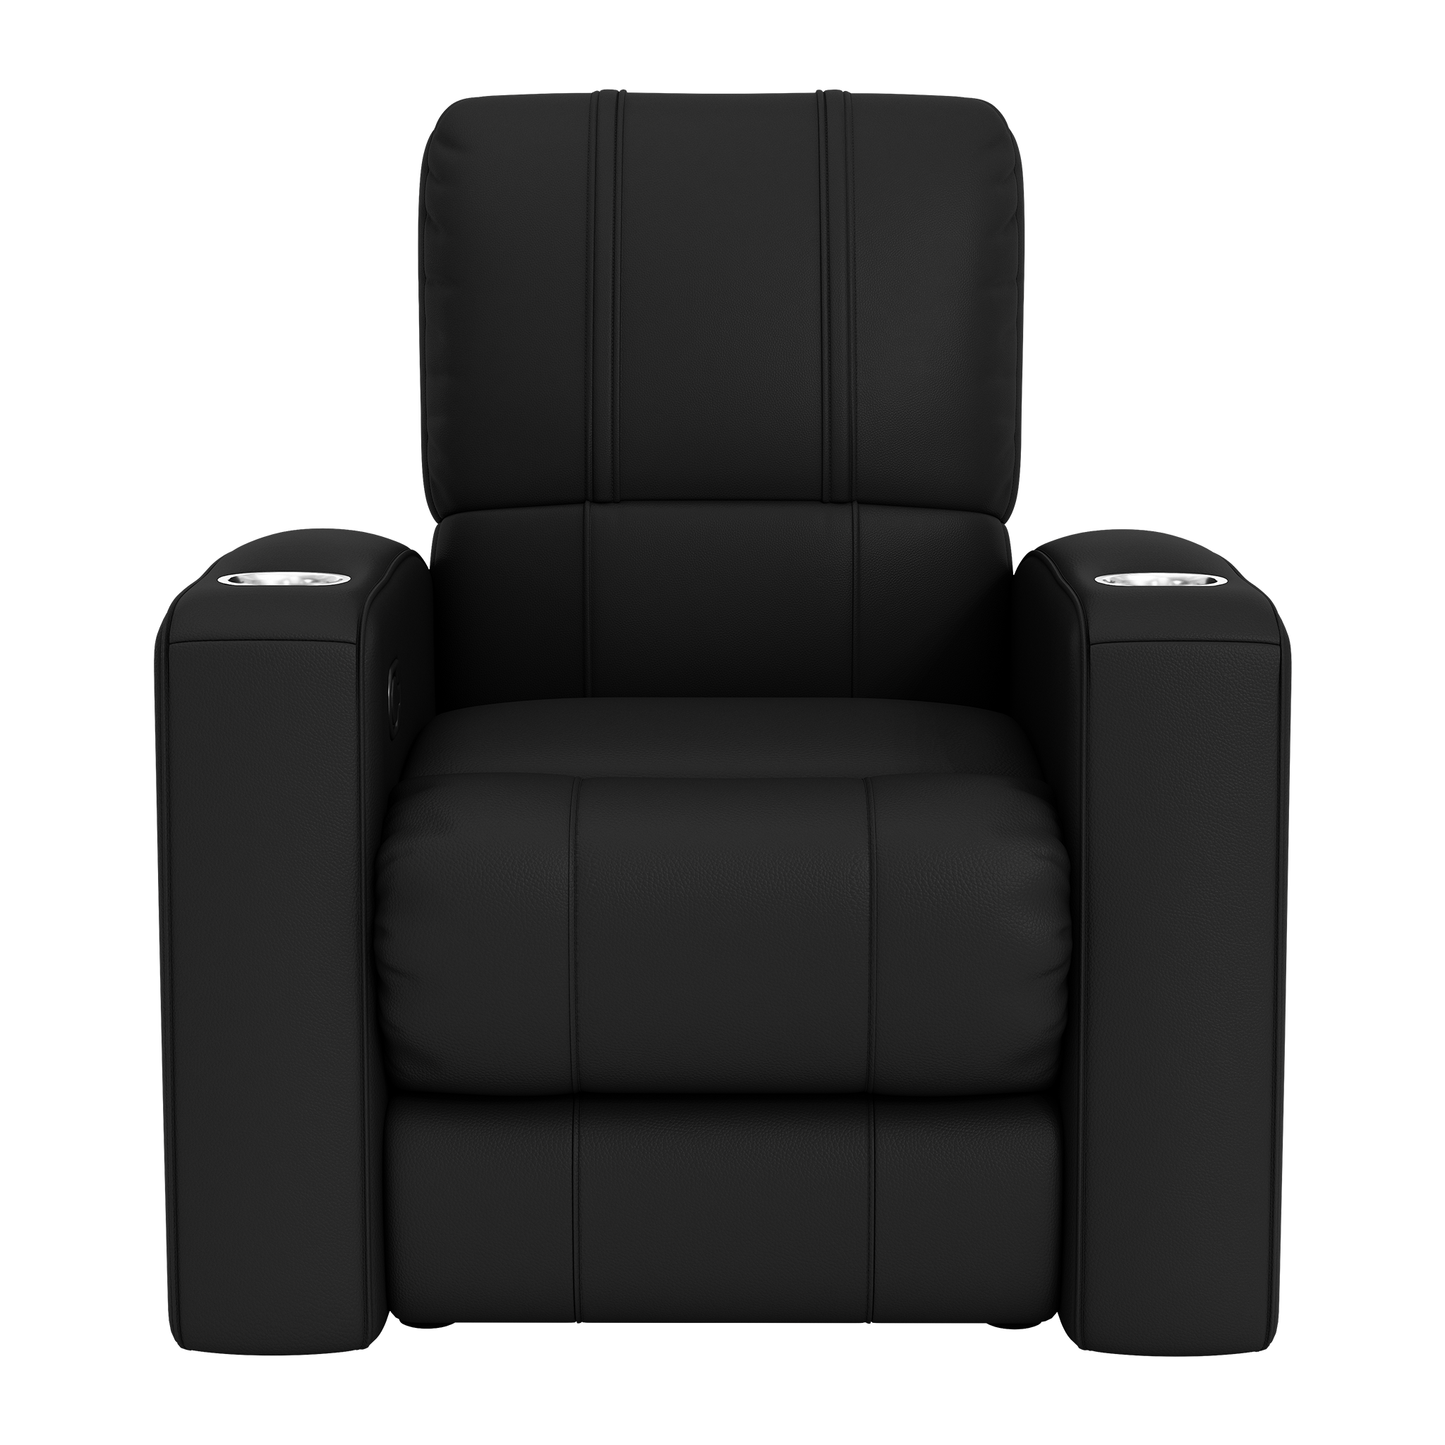 Relax Home Theater Recliner with American East Esports Conference Logo